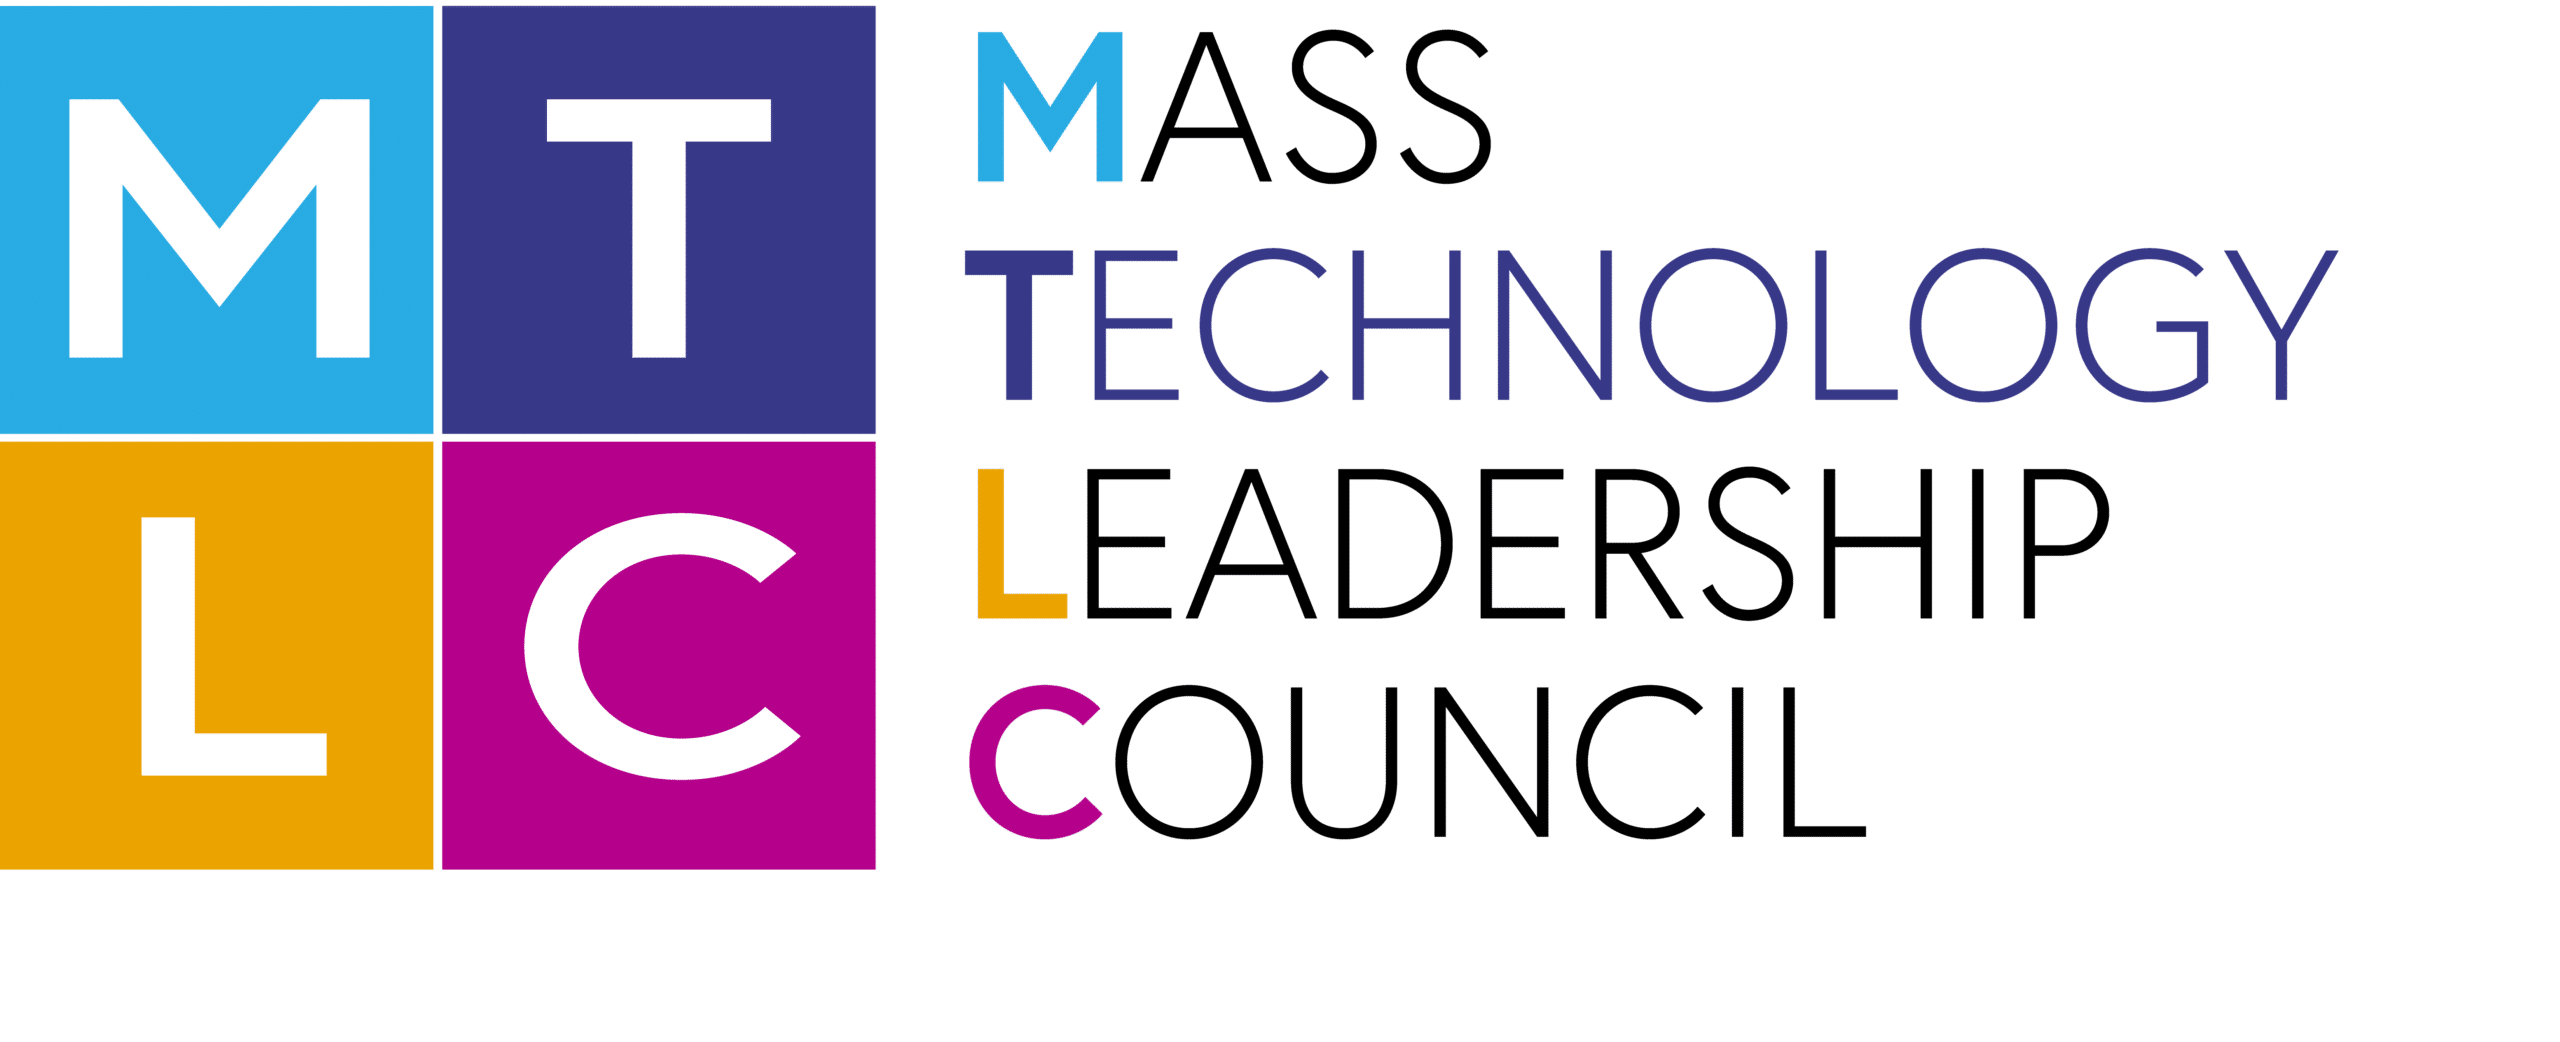 Mass Technology Leadership Council - Bringing Tech Partners to the Community